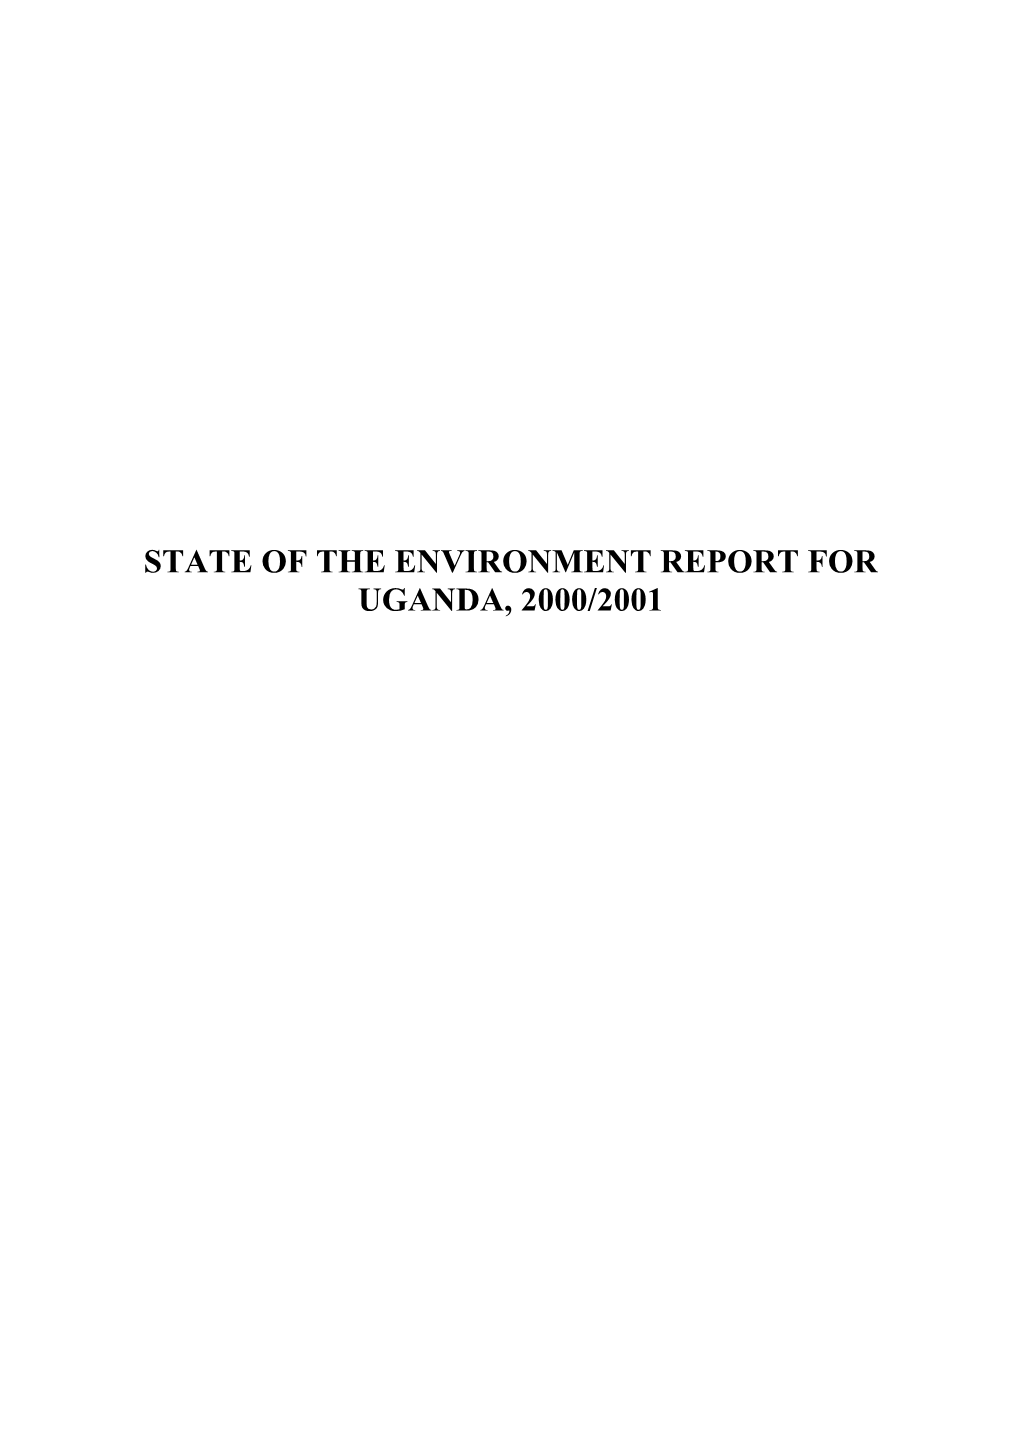 State of the Environment Report for Uganda, 2000/2001